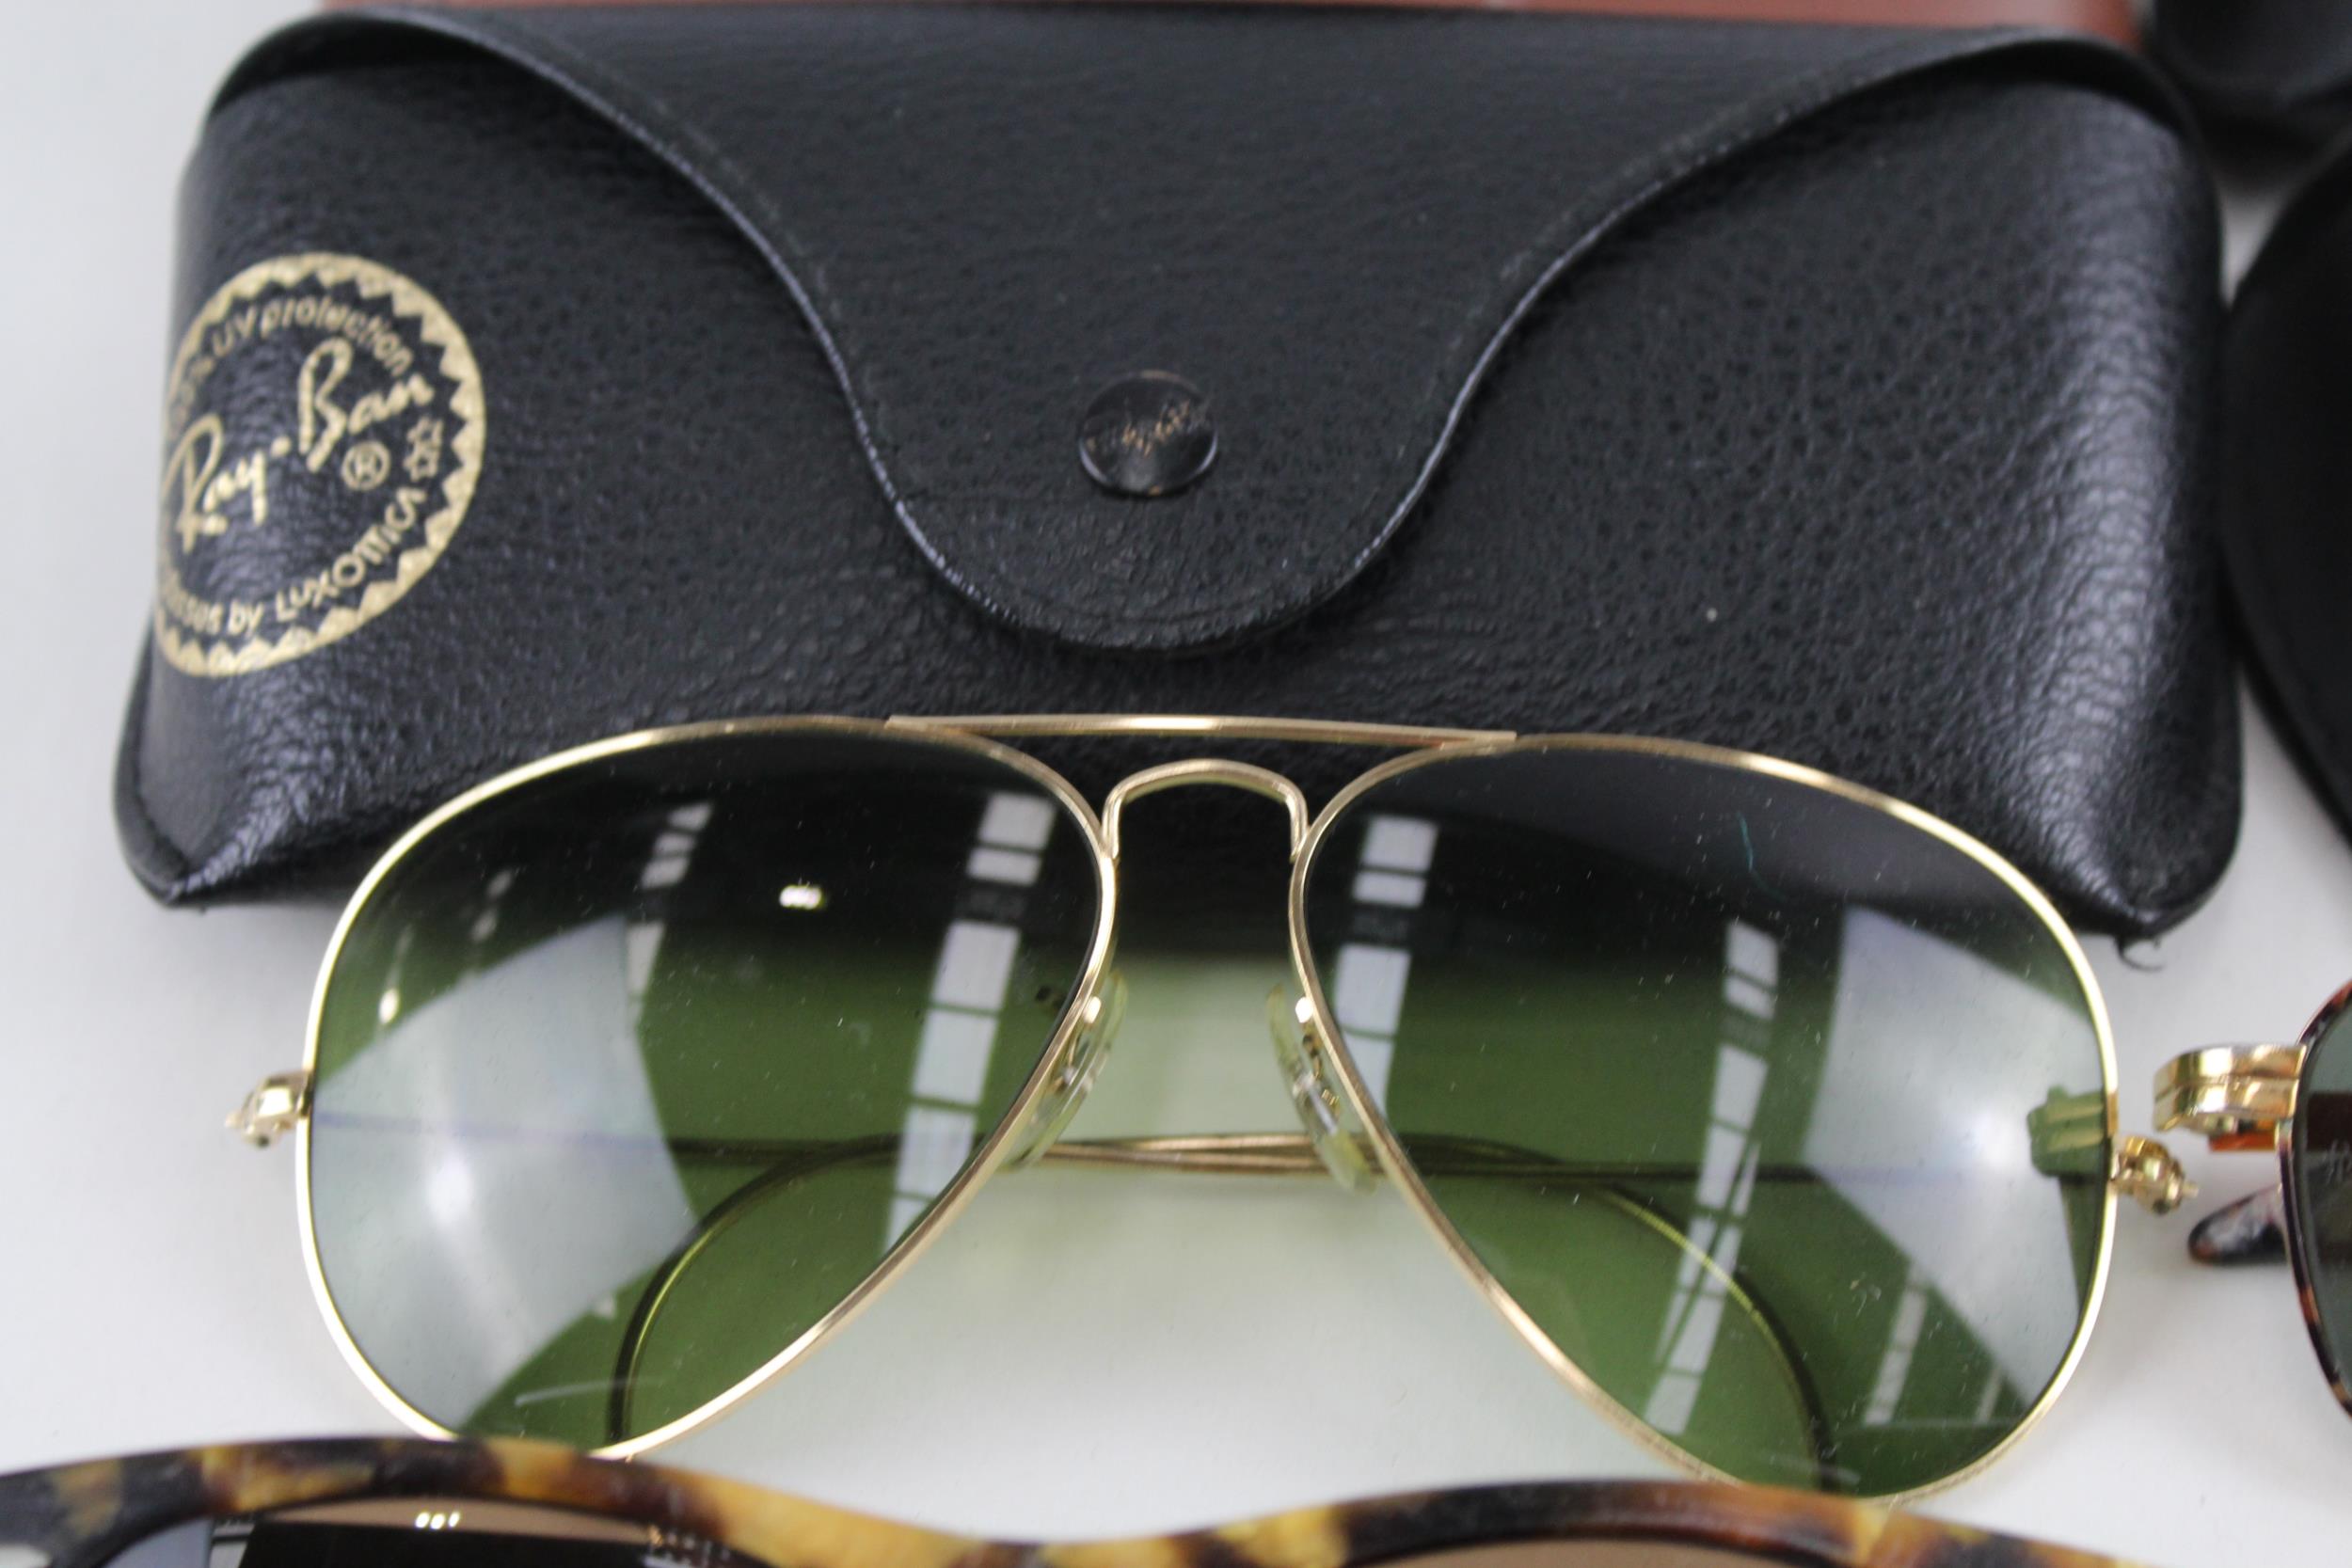 6 x Designer RayBan Sunglasses W/ Cases // Items are in previously owned condition Signs of age & - Image 2 of 7